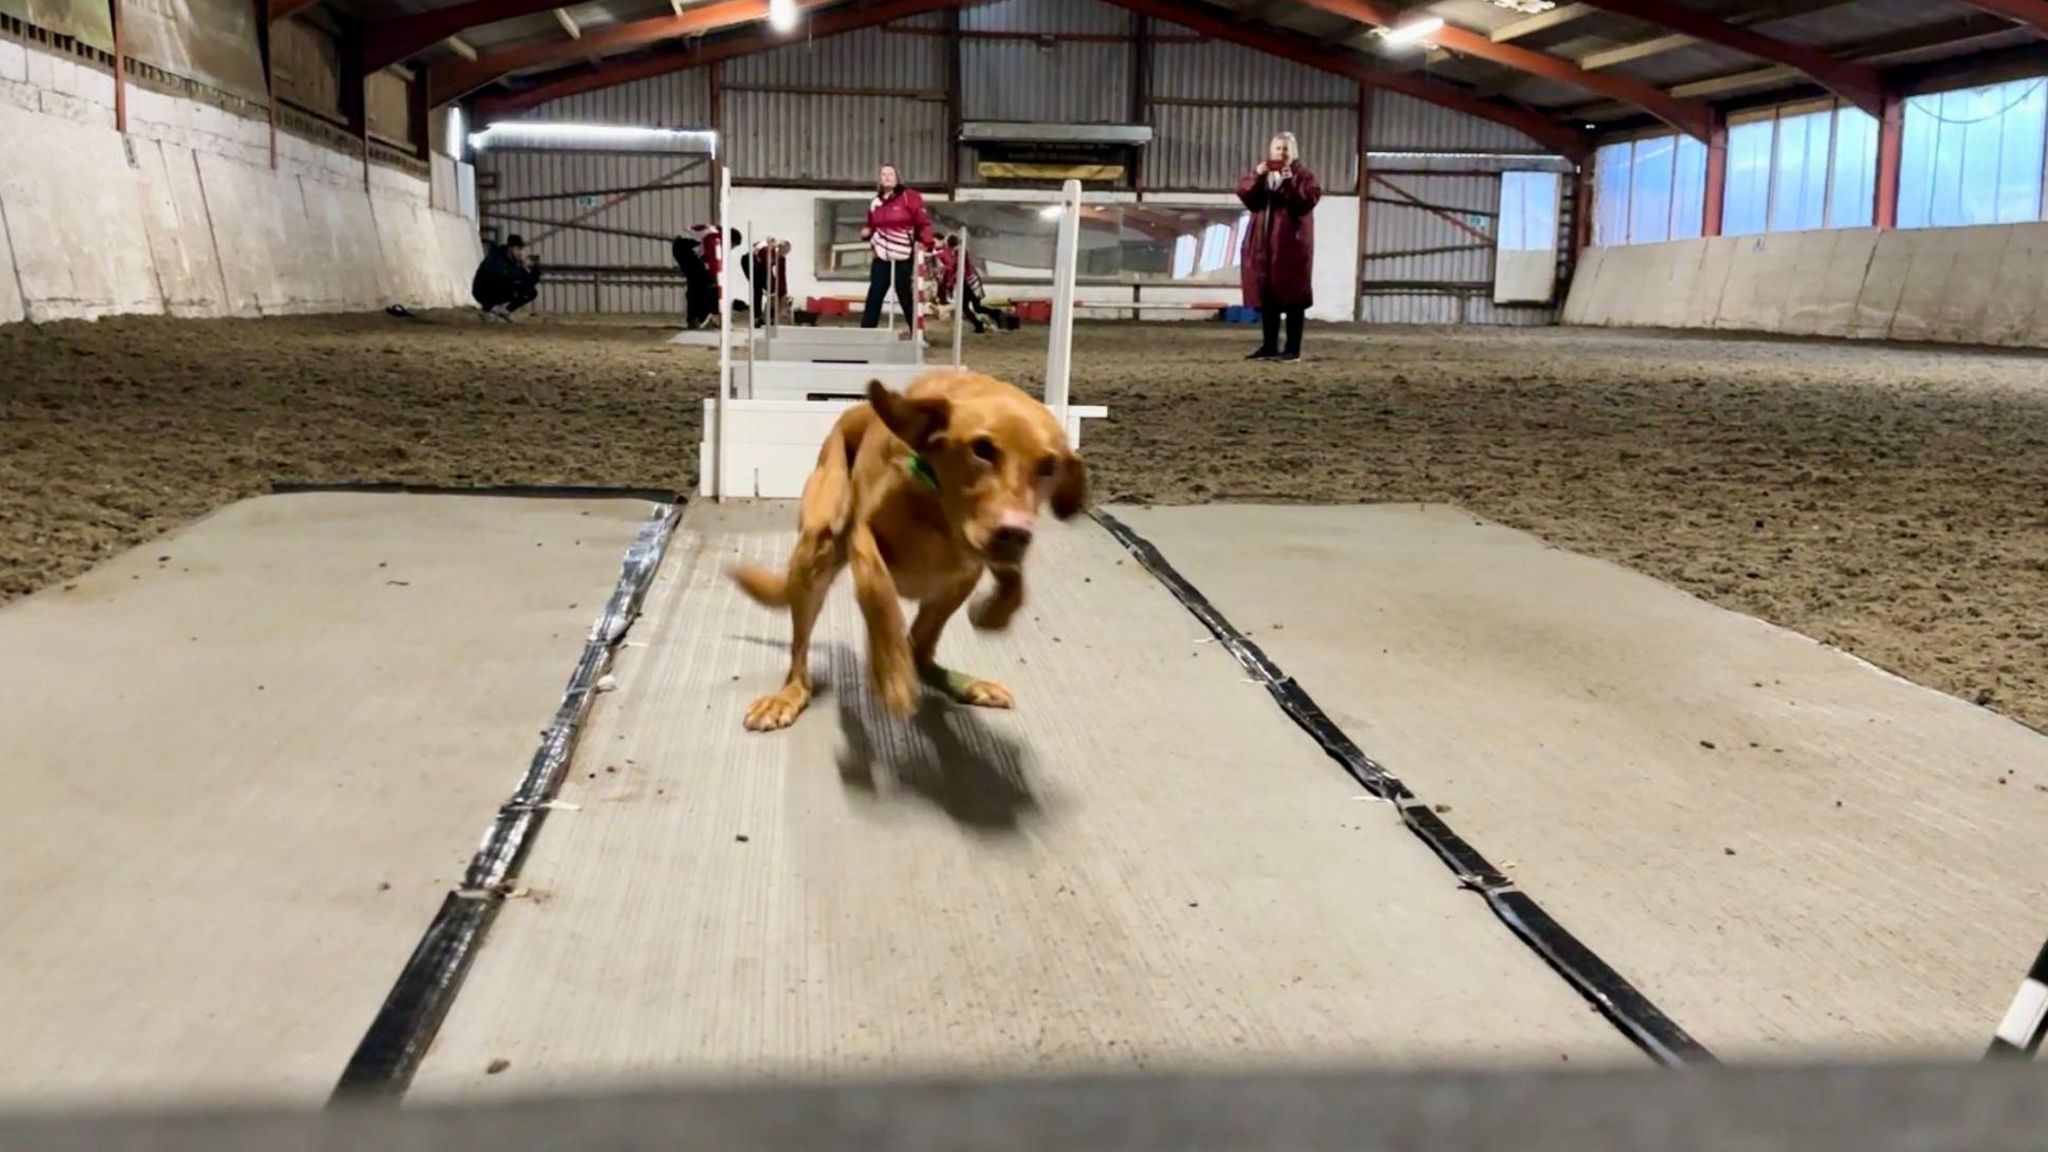 Moose, the Labrador, jumping over flyball boxes 